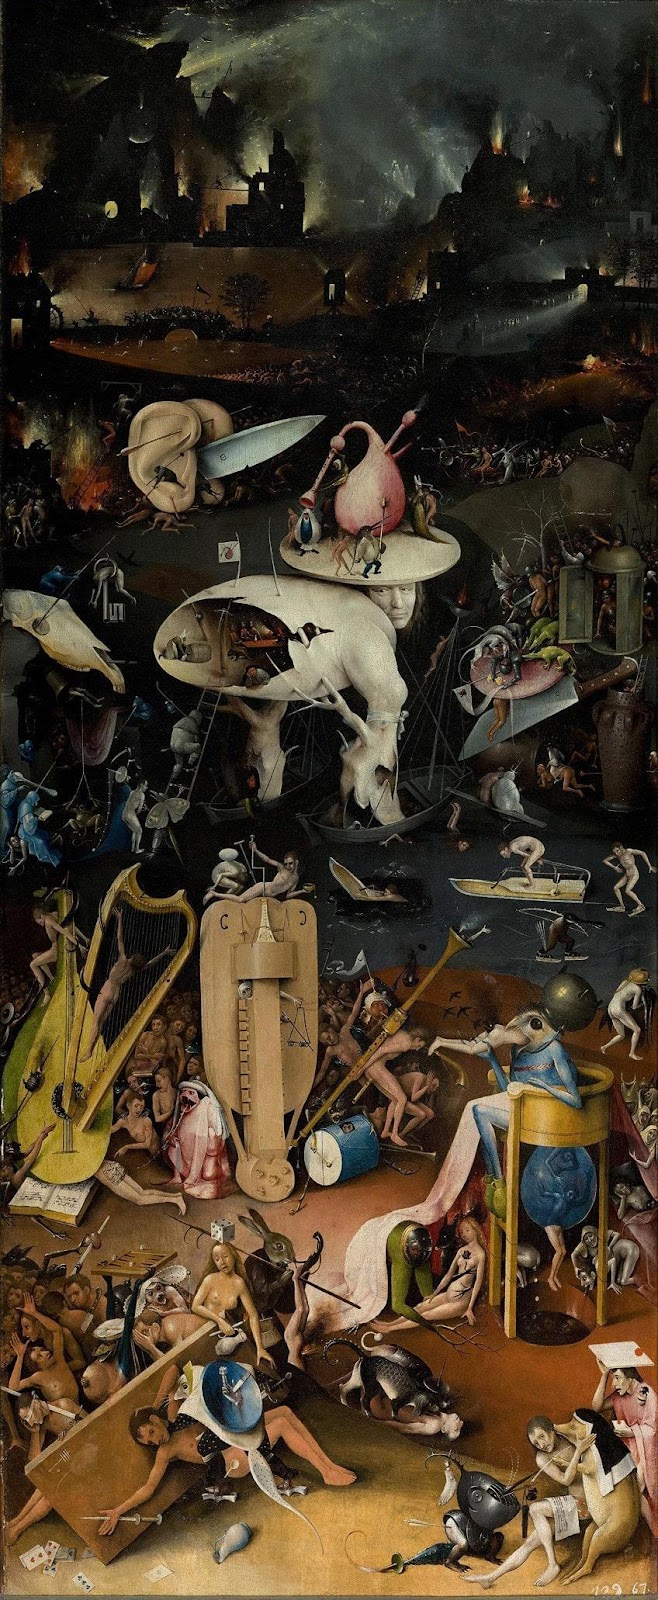 <p>Hieronymus Bosch, <em>The Garden of Earthly Delights</em> (1480-1505)</p>